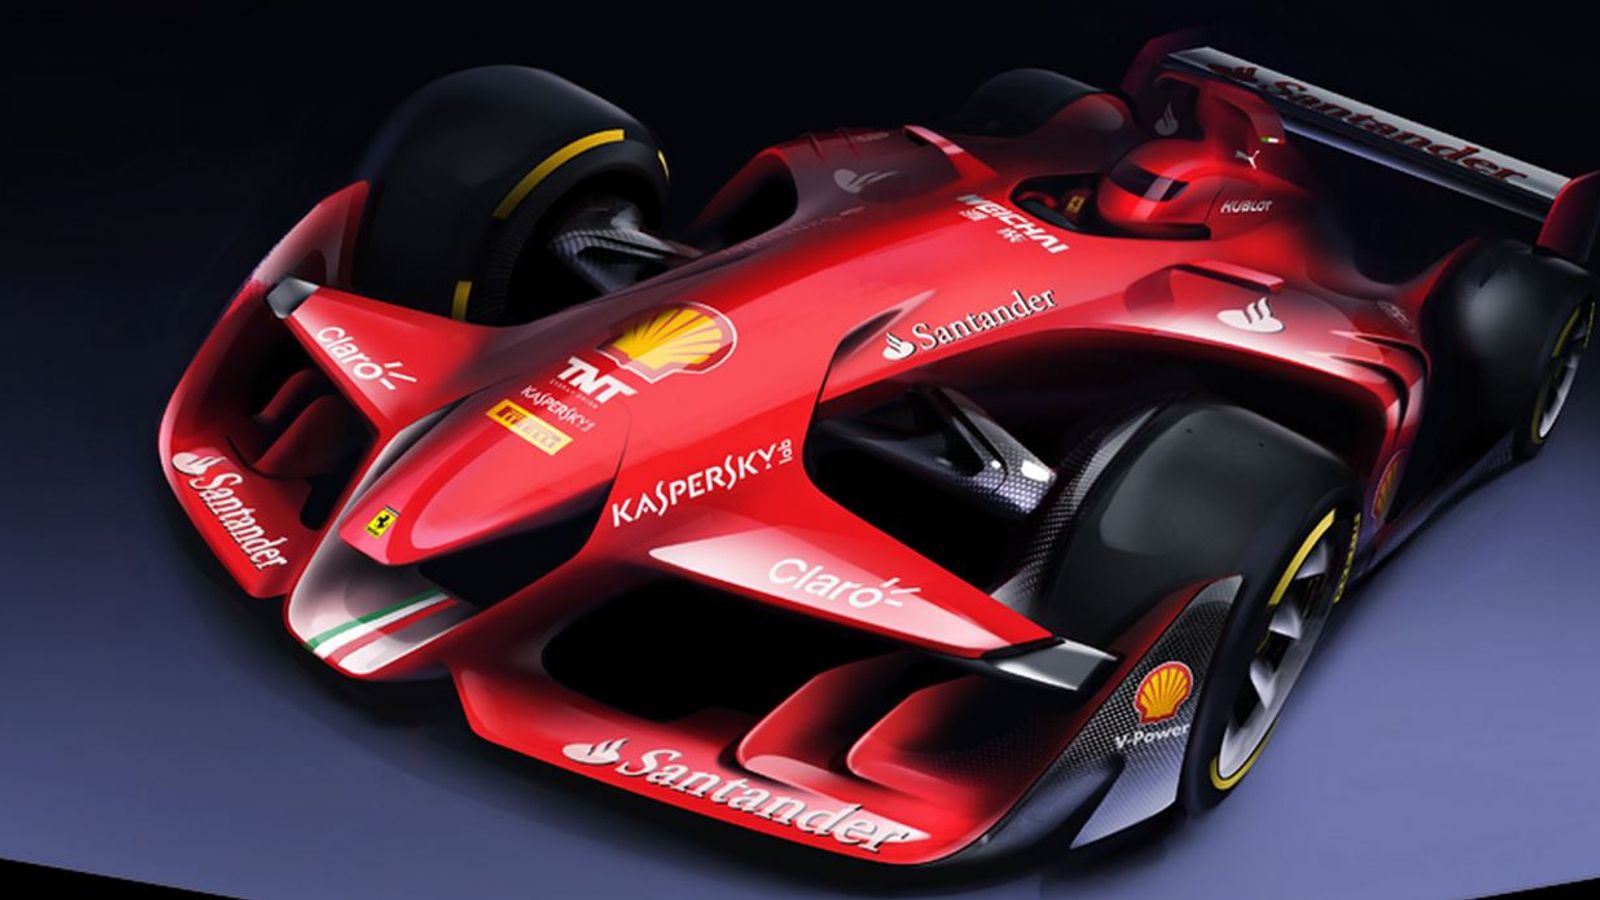 F1's future Video gamestyle car designs from 2021, says Ross Brawn